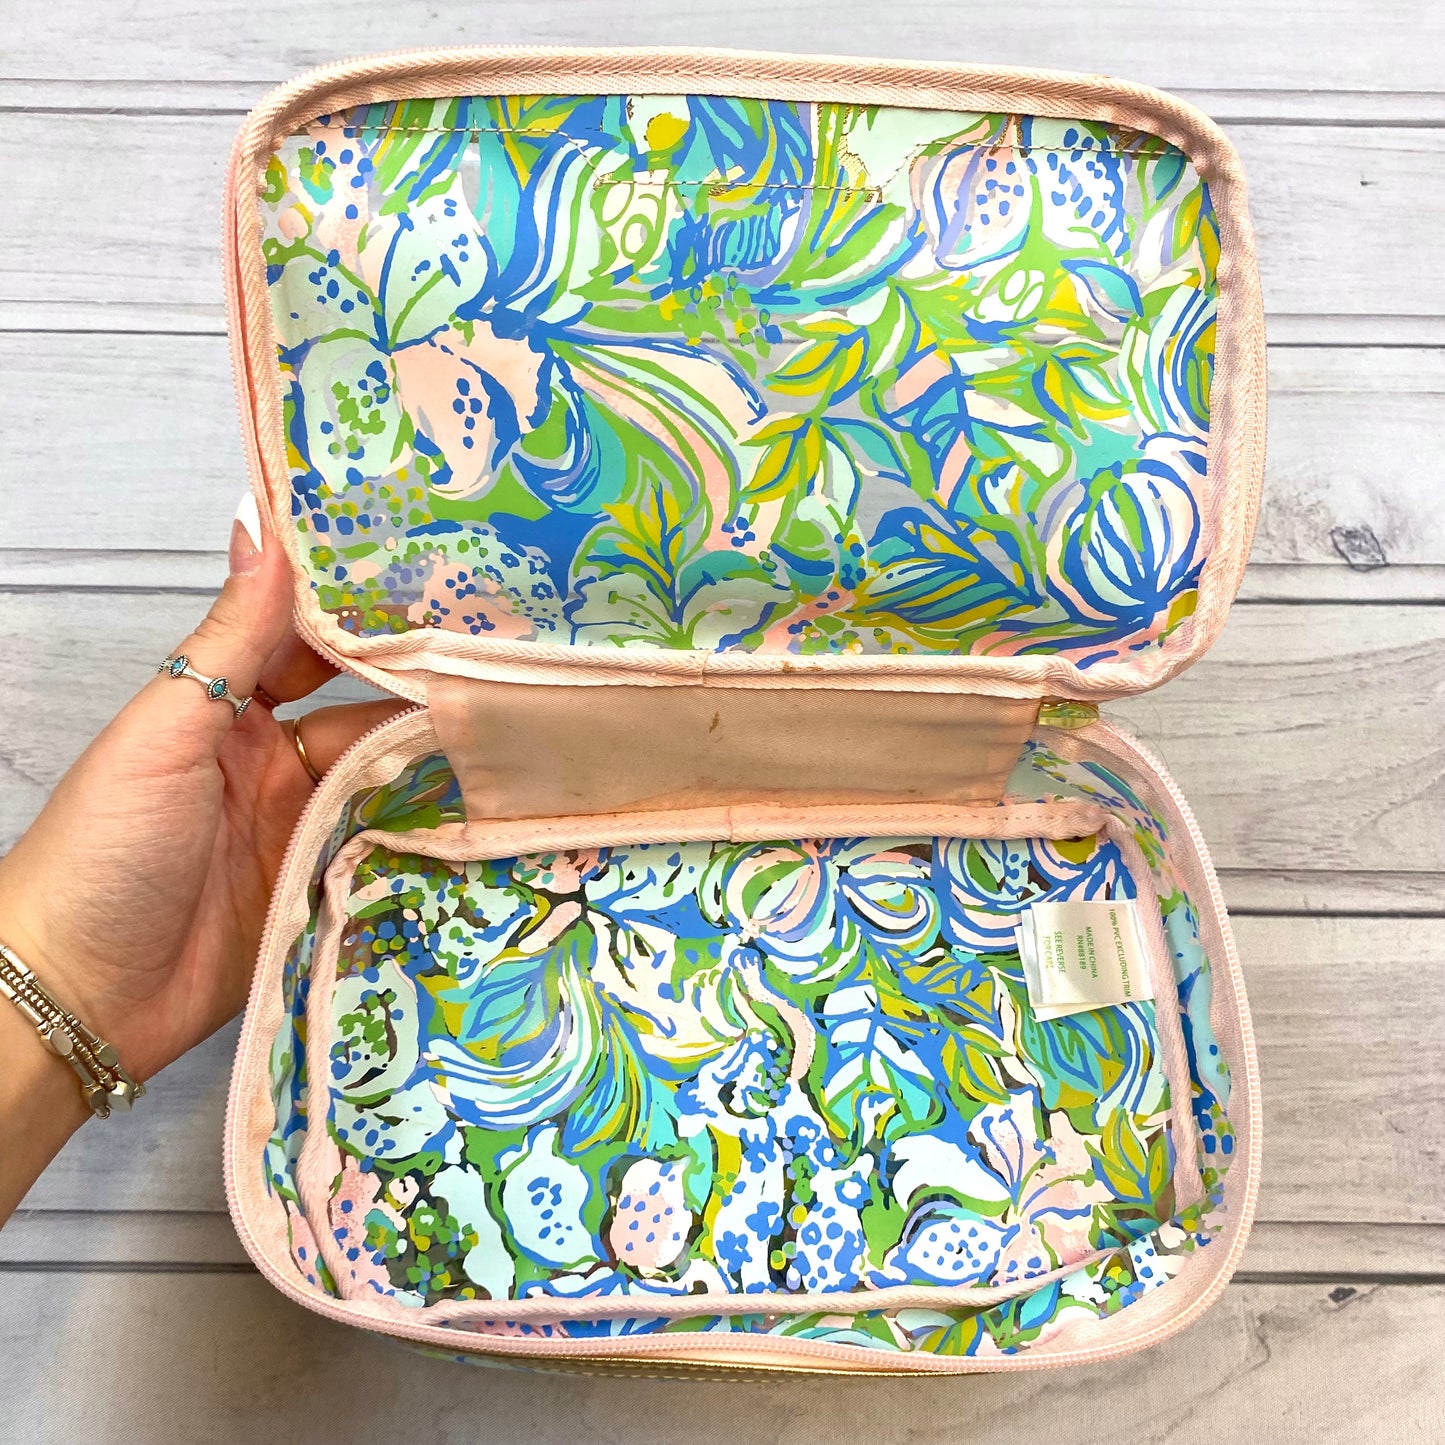 Makeup Bag Designer By Lilly Pulitzer  Size: Small